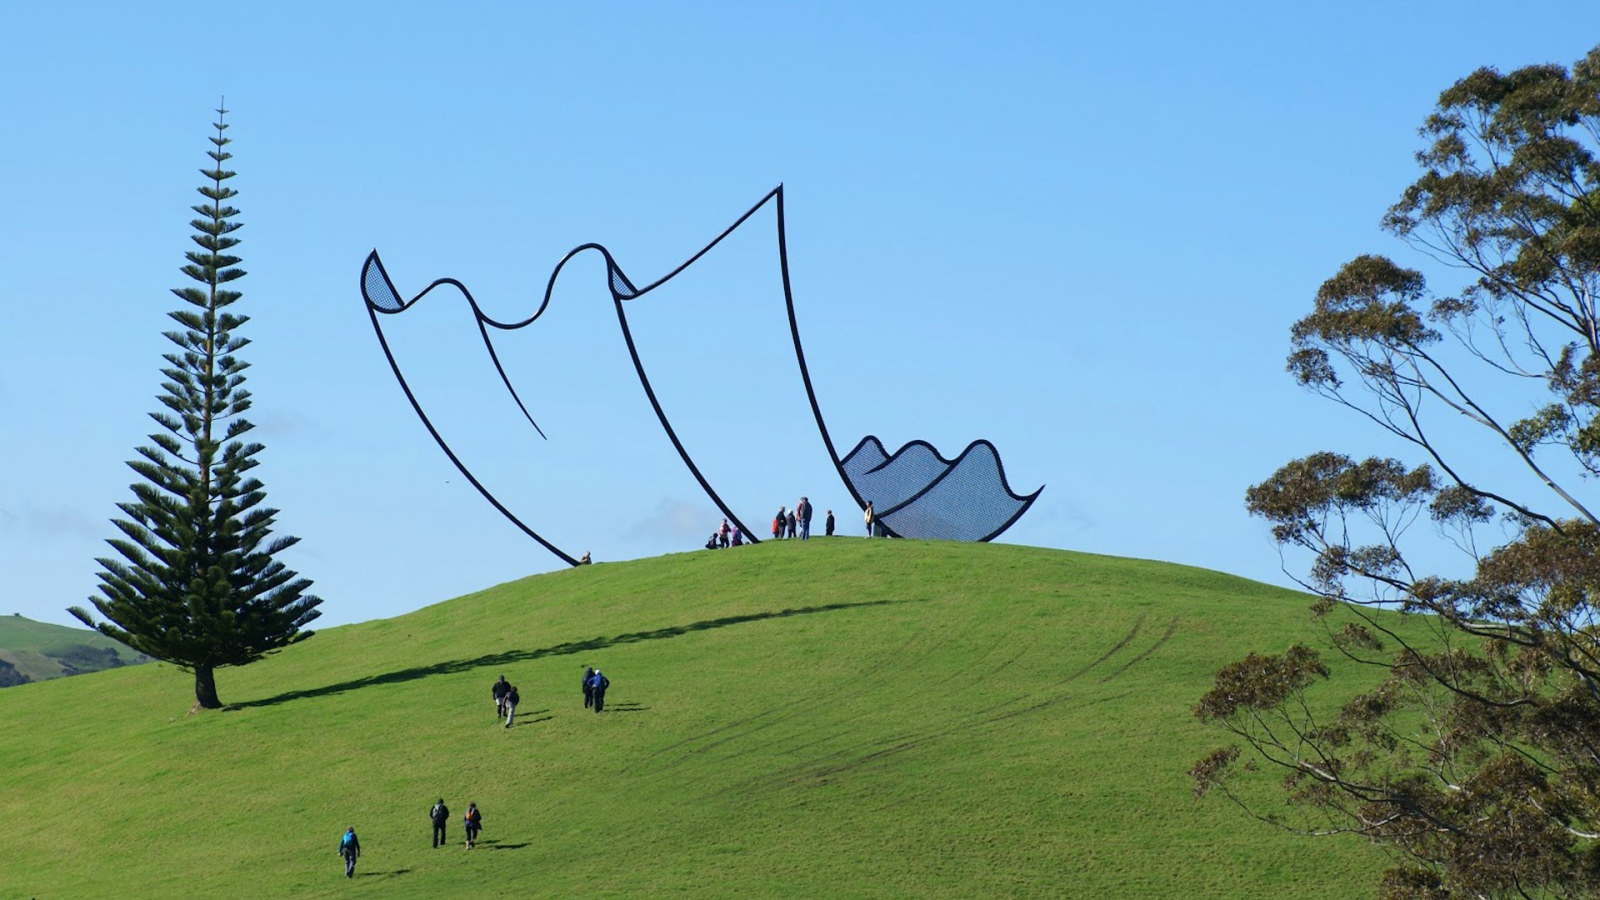 Sculpture in New Zealand that looks like a painted